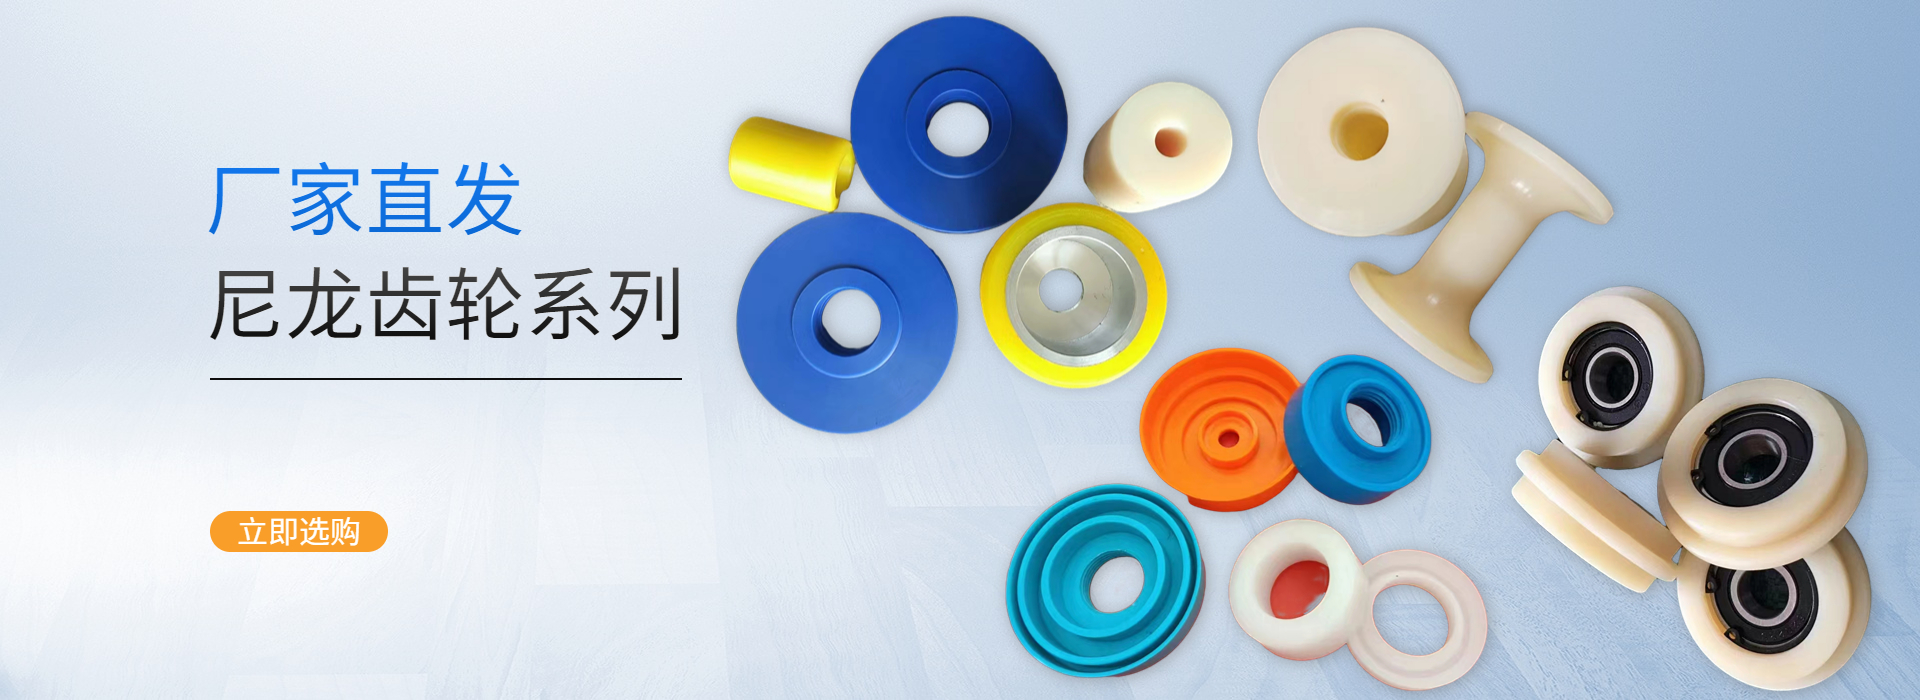 Zhongming Bearing Roller Mandrel Chain Upper and Lower Nylon Wheels Engineering Plastic Shaped Parts POM Guide Wheels